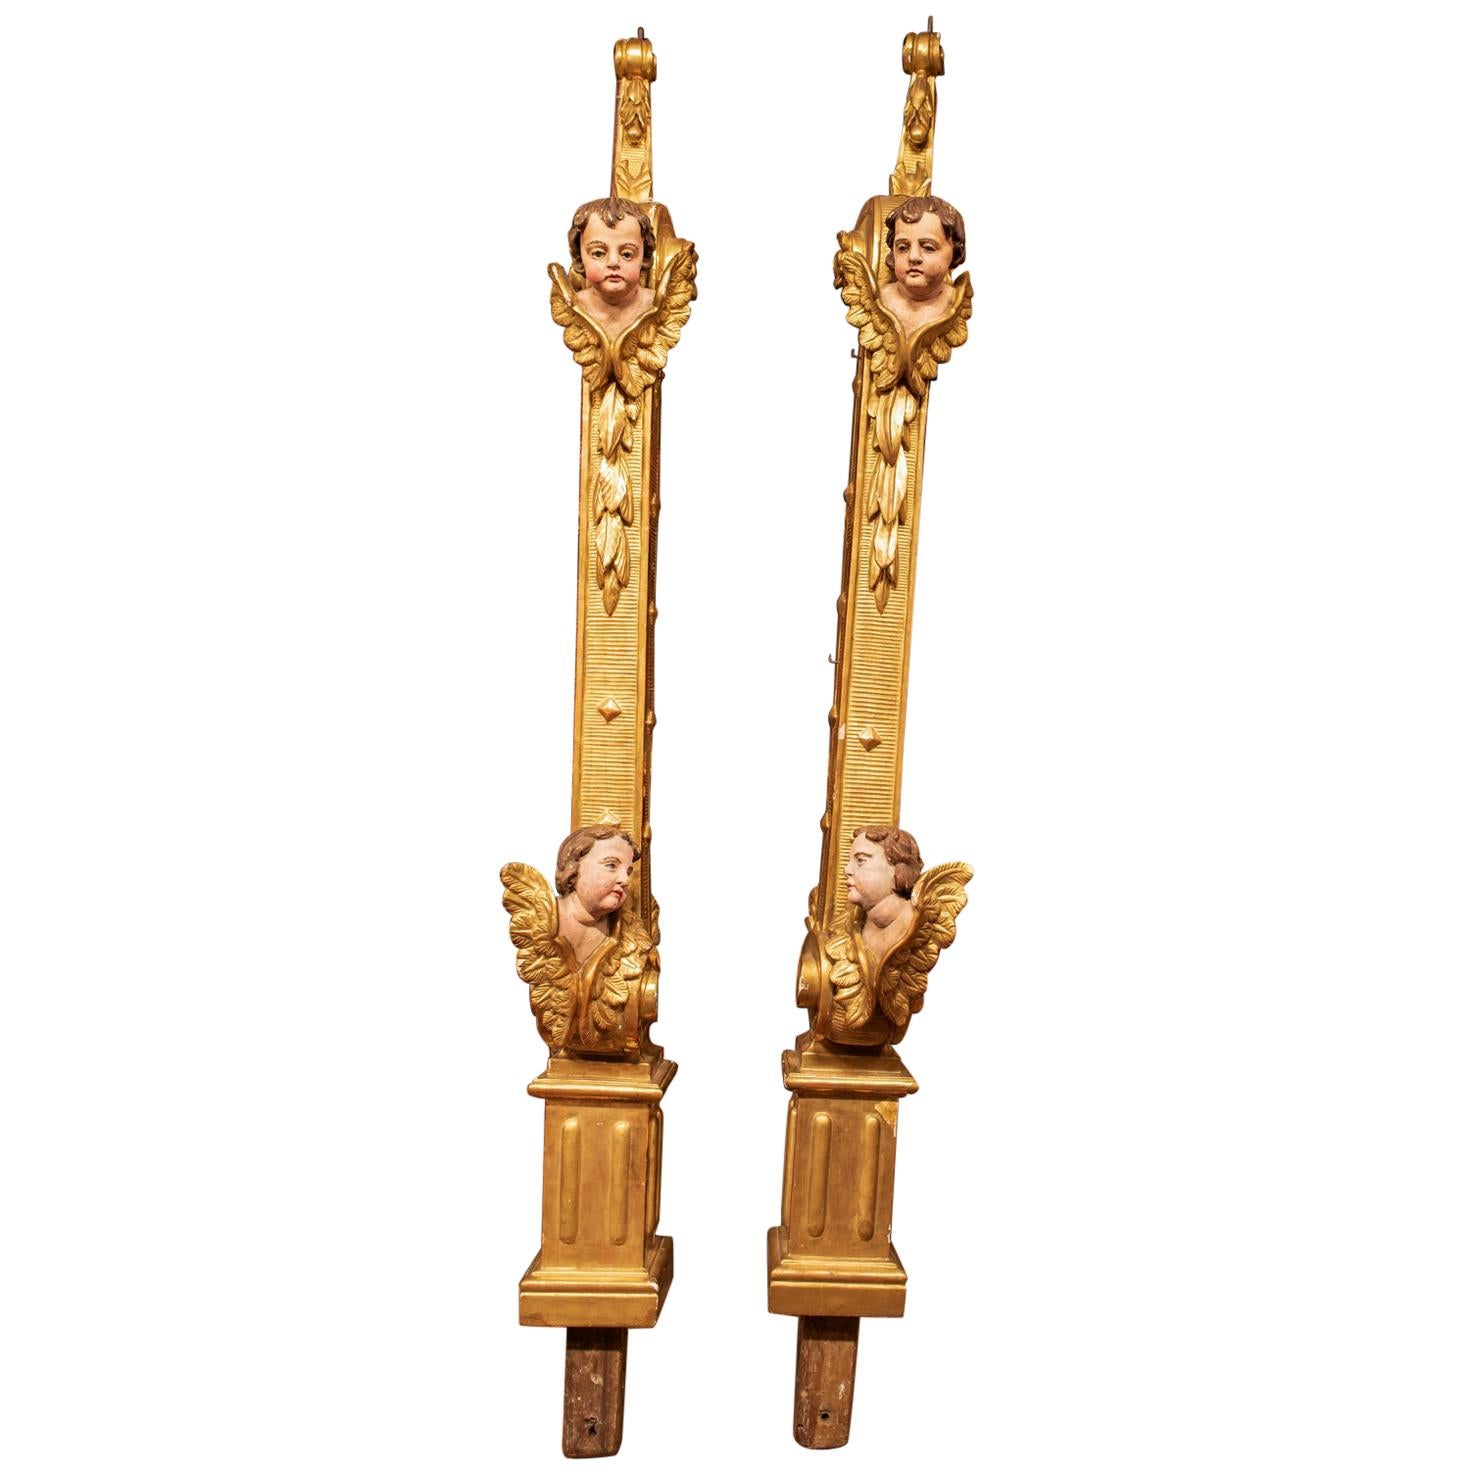 Antique Pair of Gilded Uprights / Columns with Cherubs, 18th Century, Italy